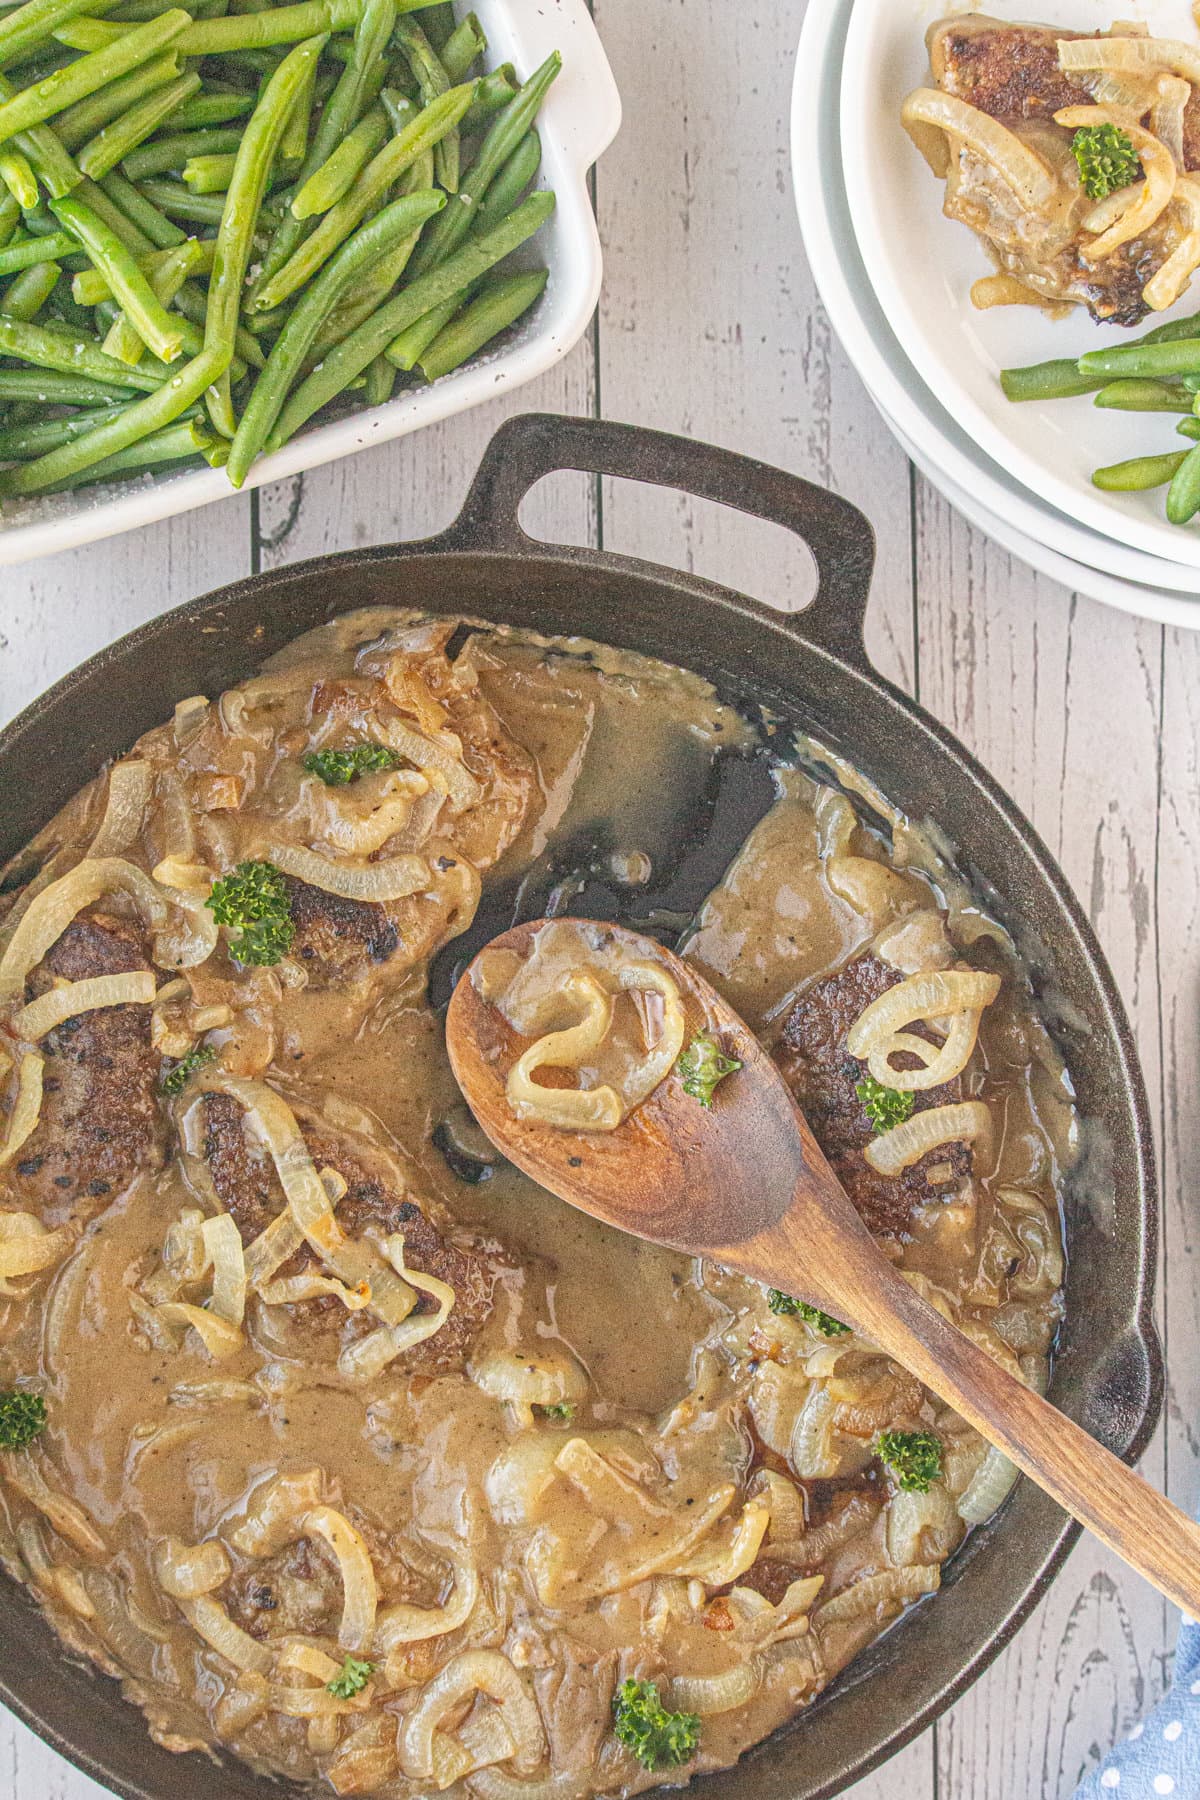 A skillet with gravy-covered liver and onions next to a plate of green beans.